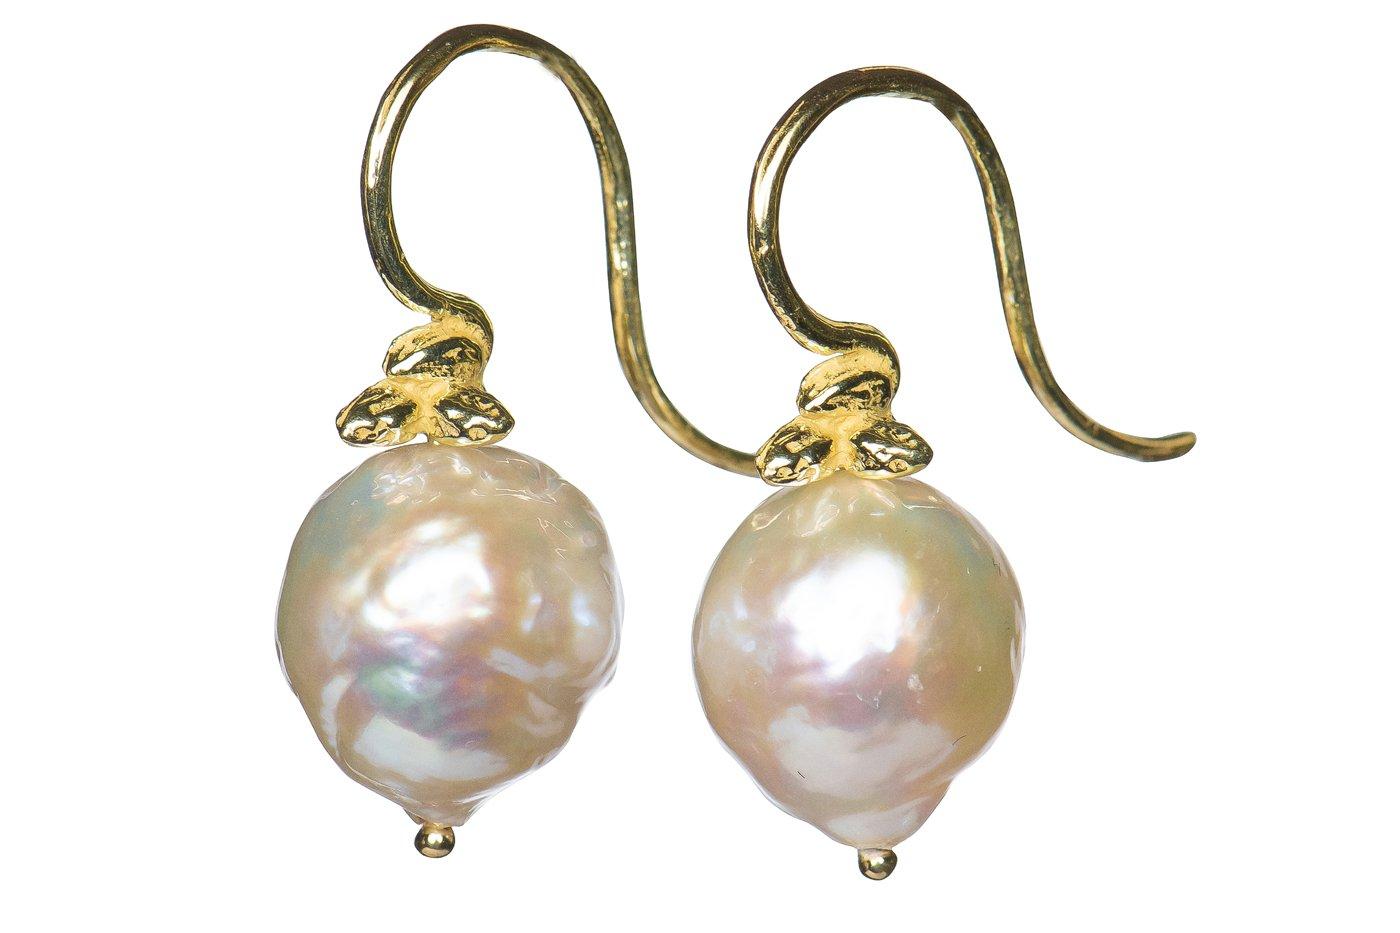 Classic luxury for every day, 11-12mm white baroque freshwater pearls hung from Gabrielle's 18k triple-seed earwires.